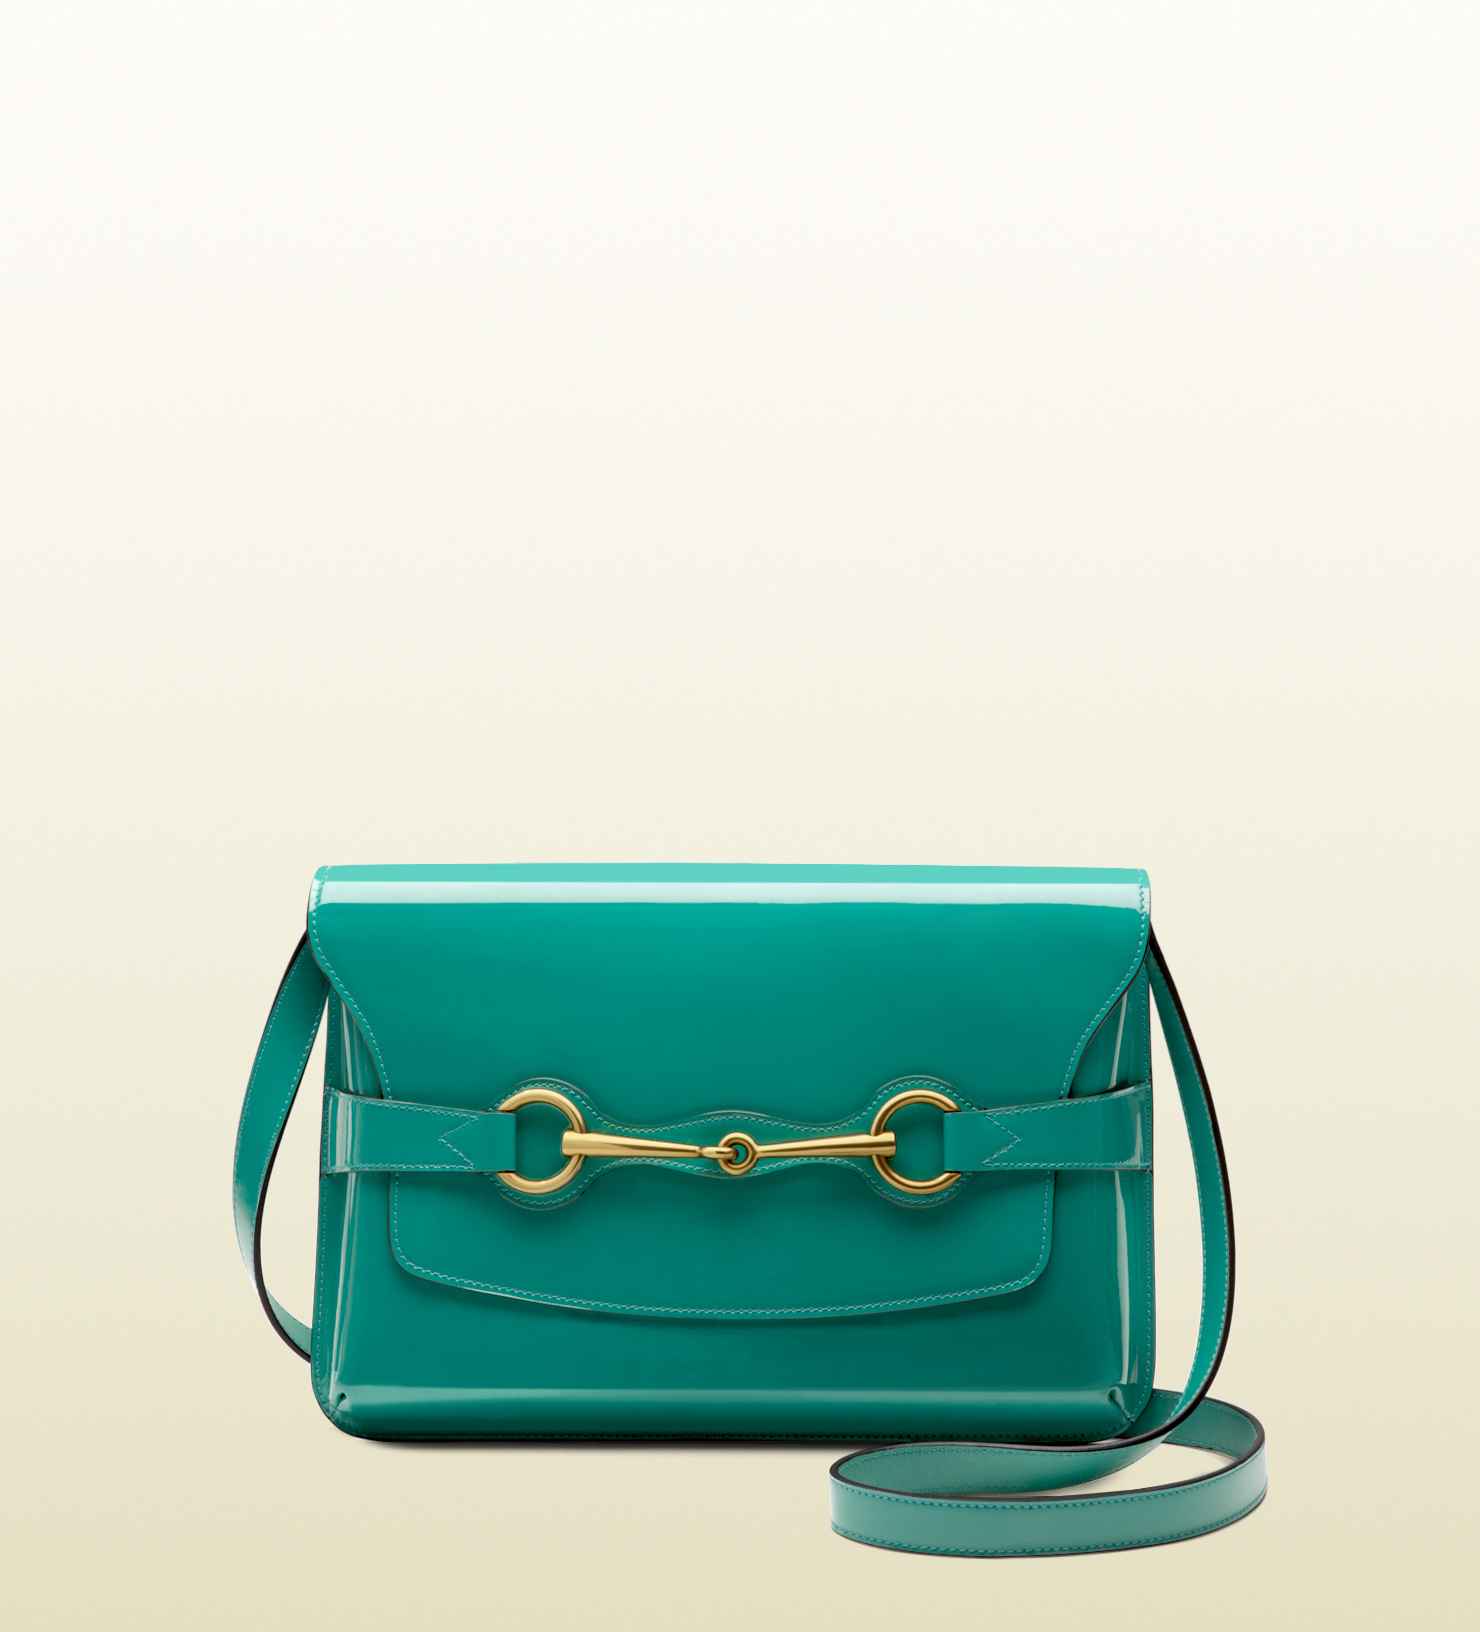 Lyst - Gucci Bright Bit Patent Leather Shoulder Bag in Green